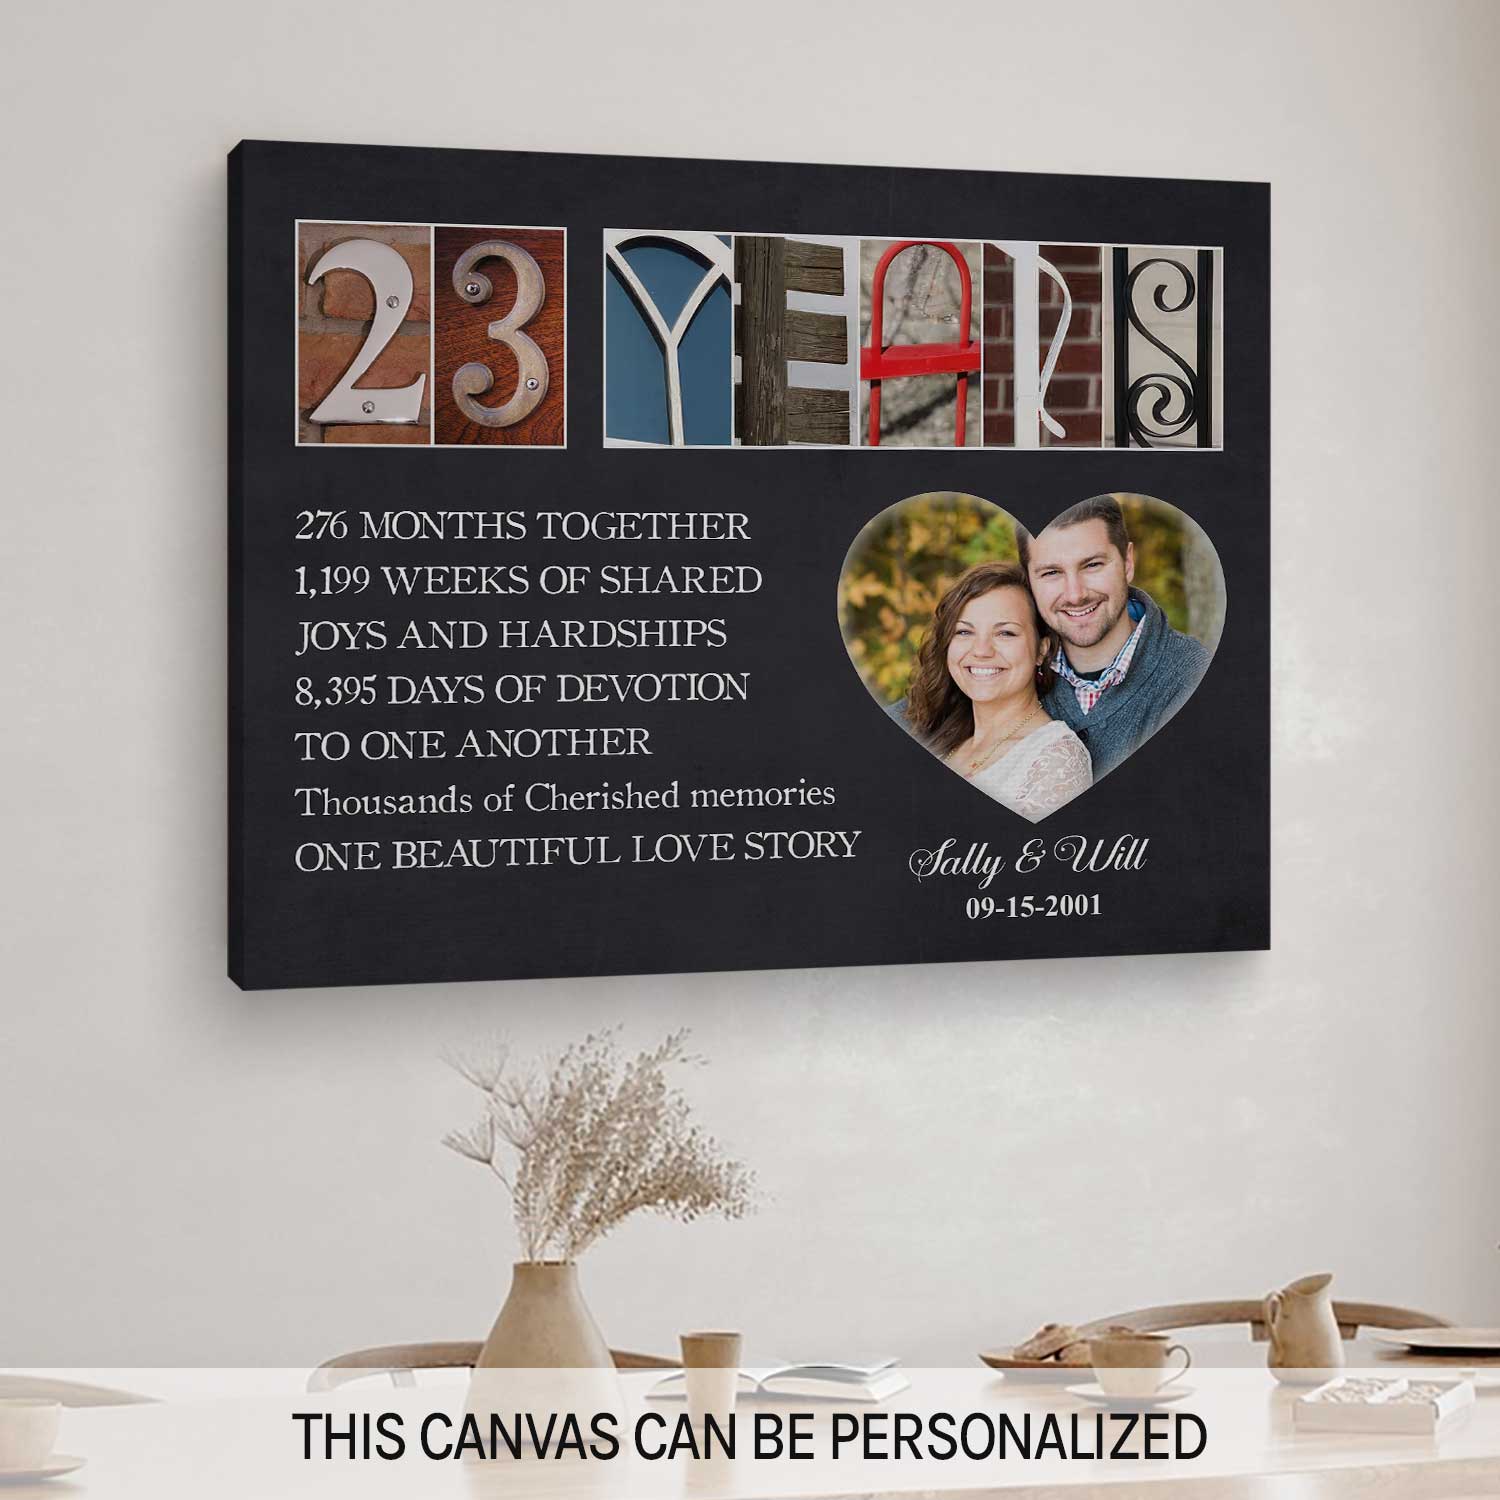 23 Years - Personalized 23 Year Anniversary gift For Parents - Custom Canvas Print - MyMindfulGifts